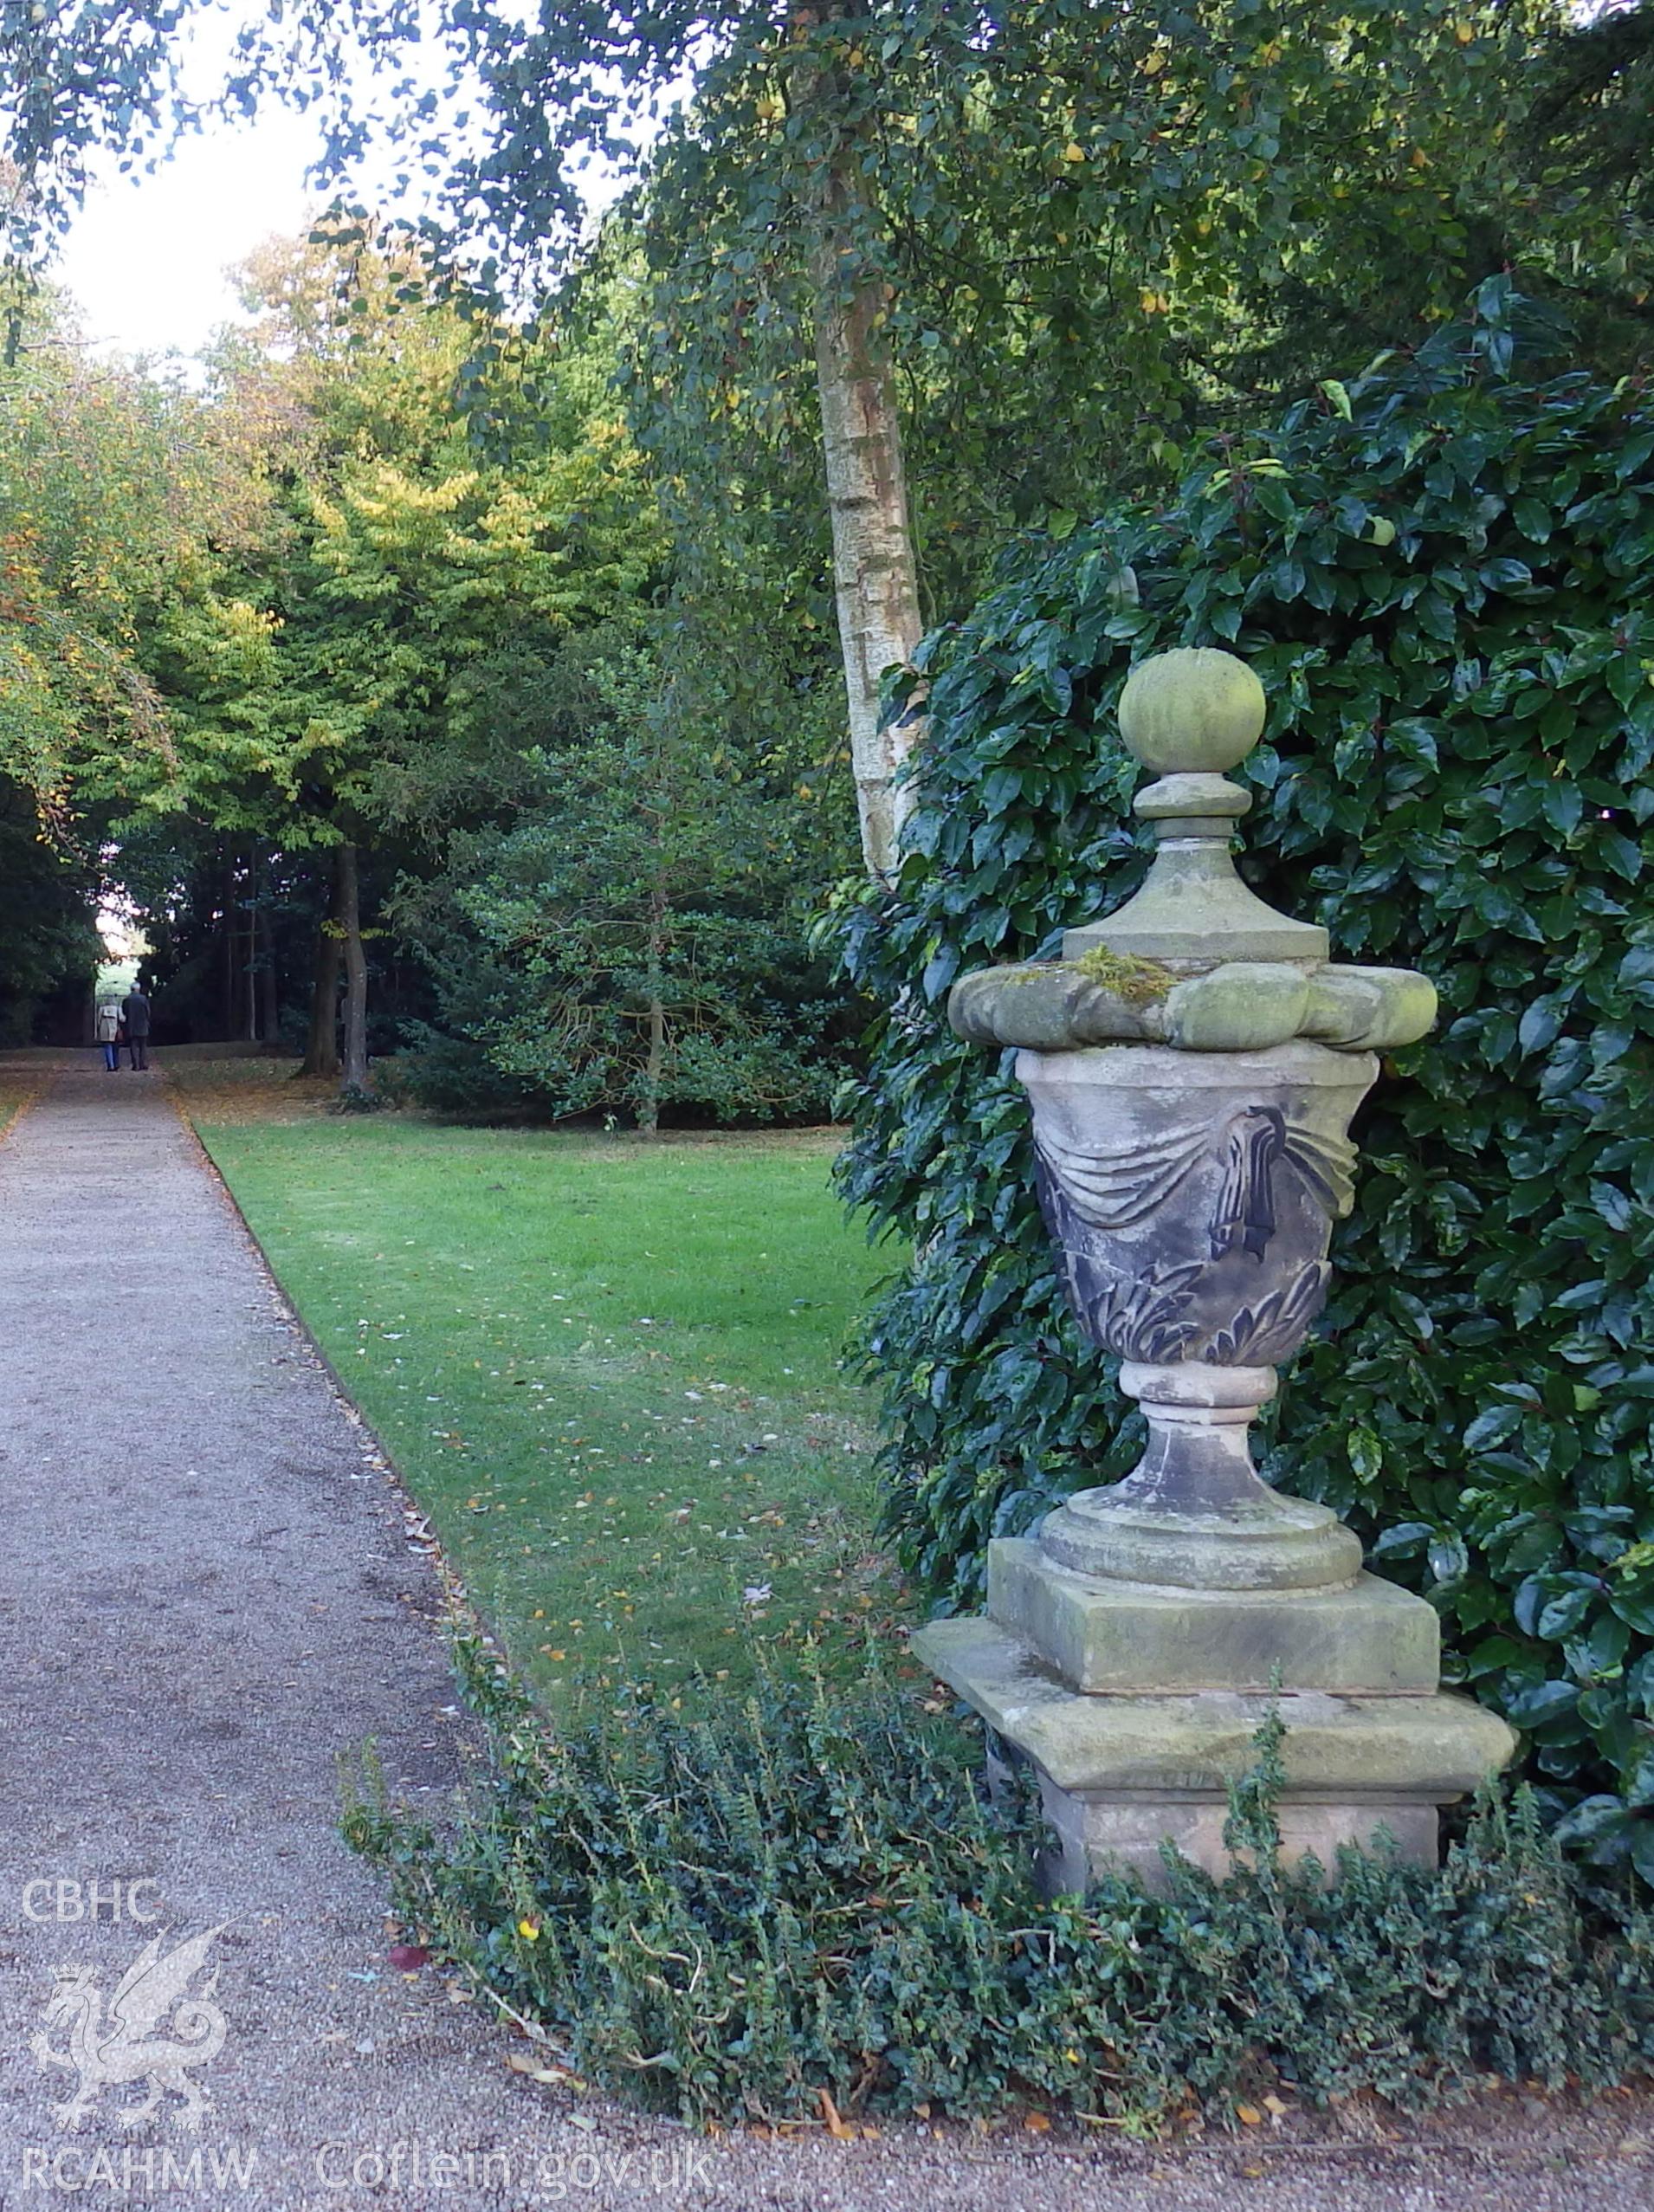 Decorative urn at entrance to Moss Walk (southeastern compartment of garden)